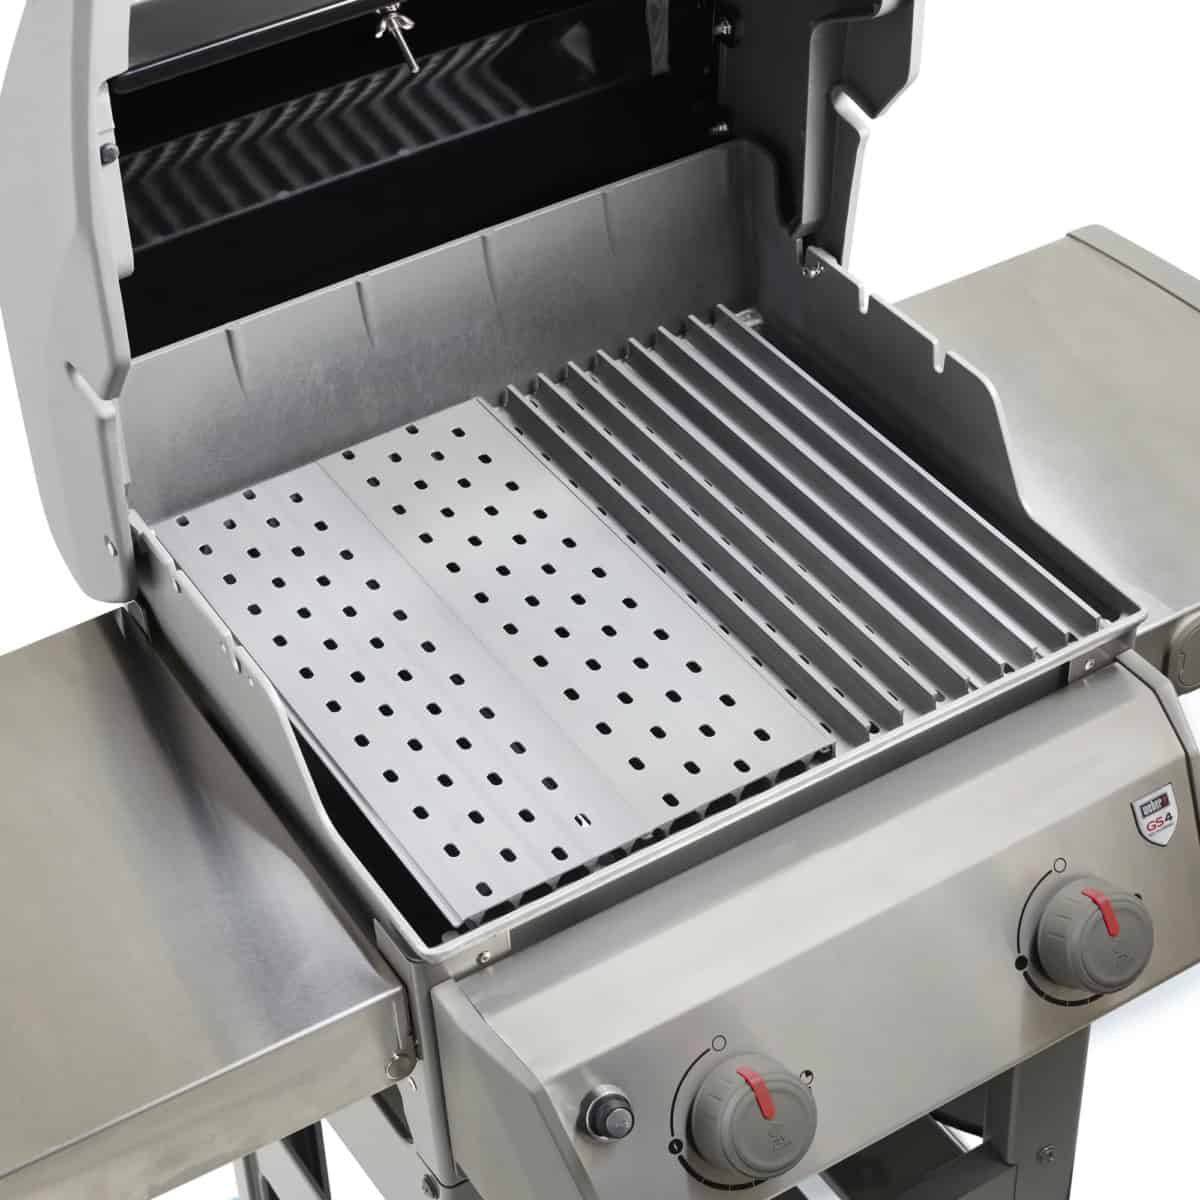 A gas grill with two different sets of grill grates installed